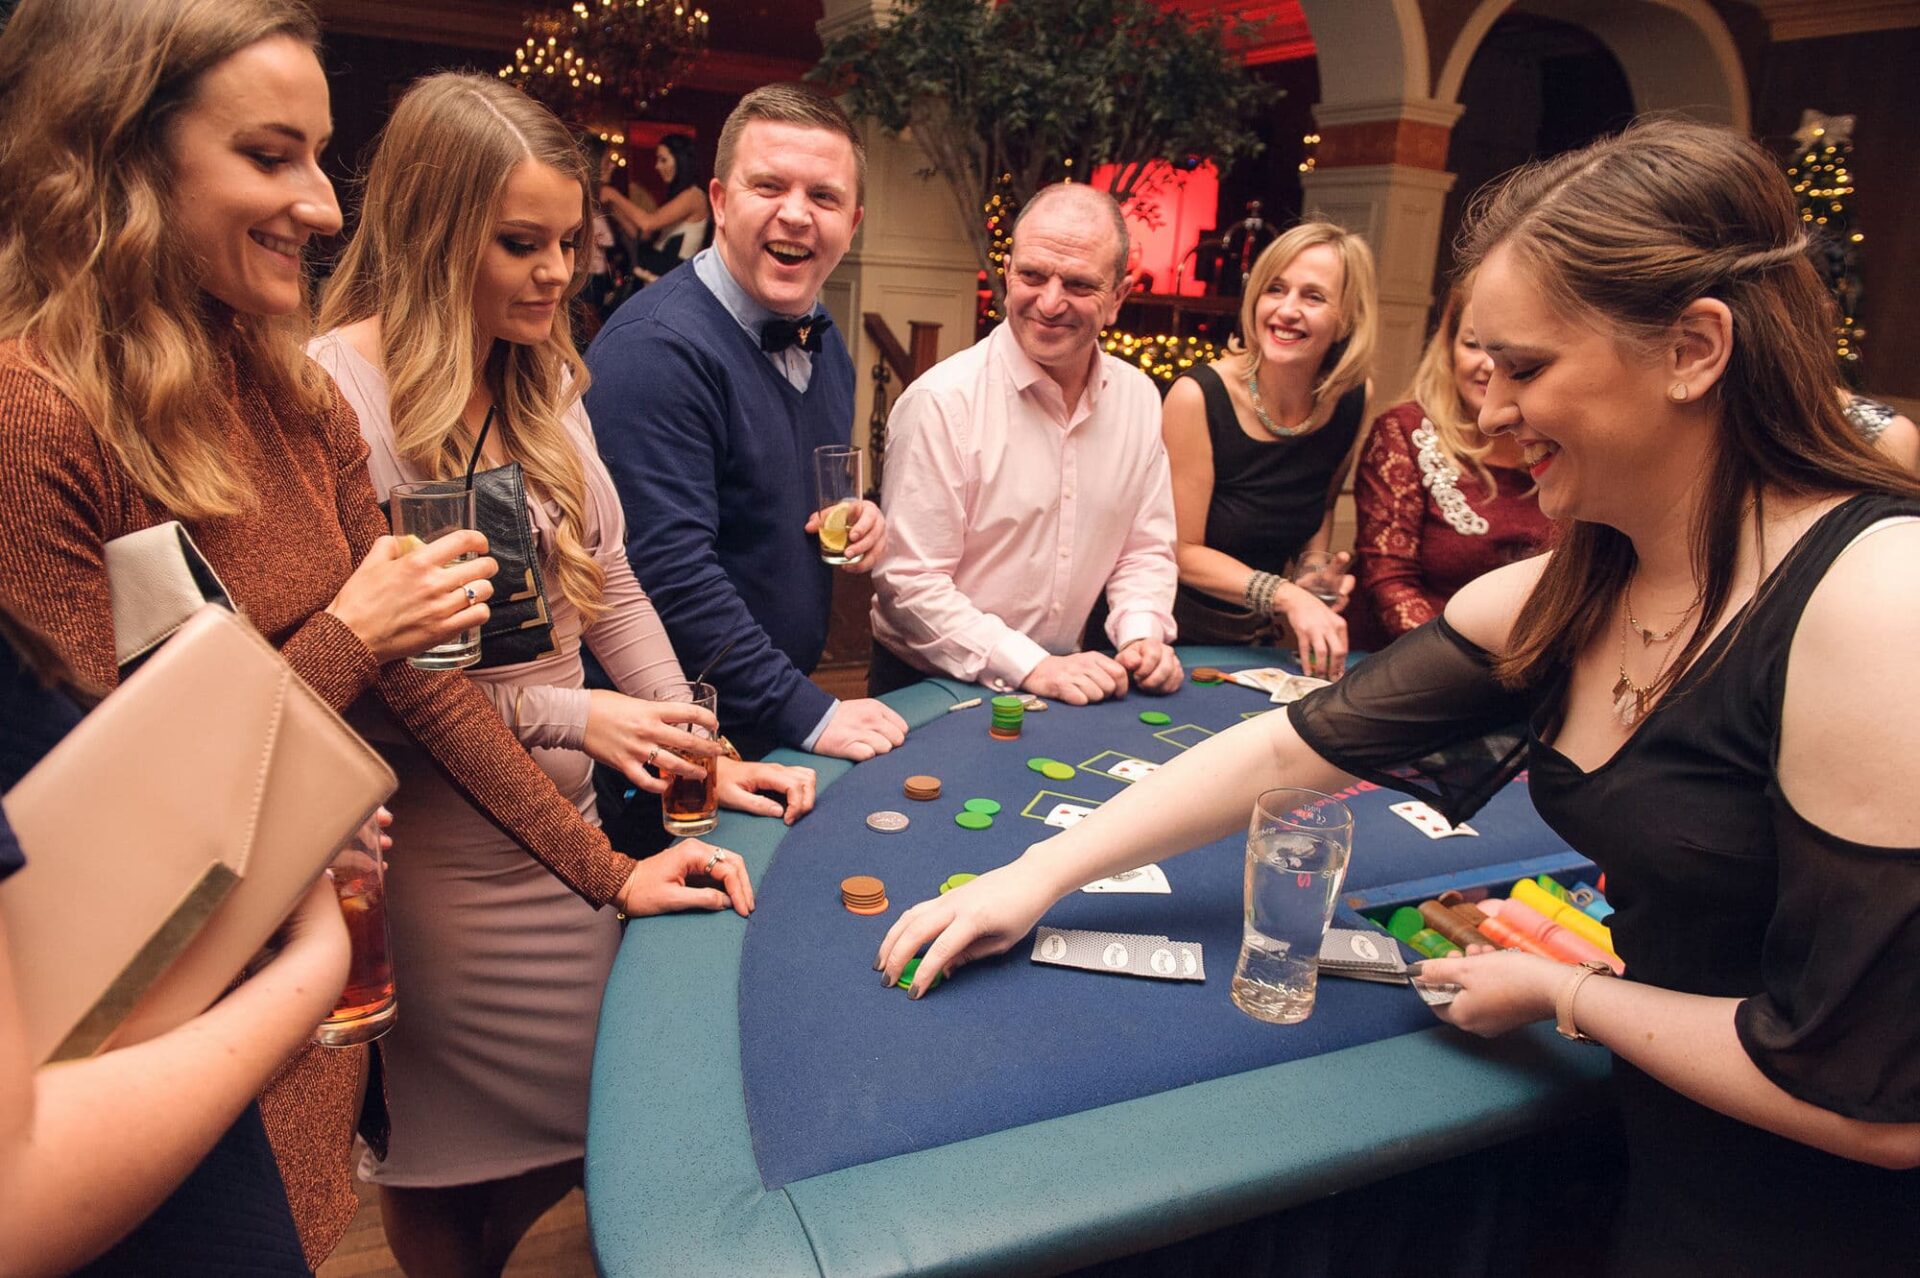 gambling at the blackjack tables at a fun casino night themed event